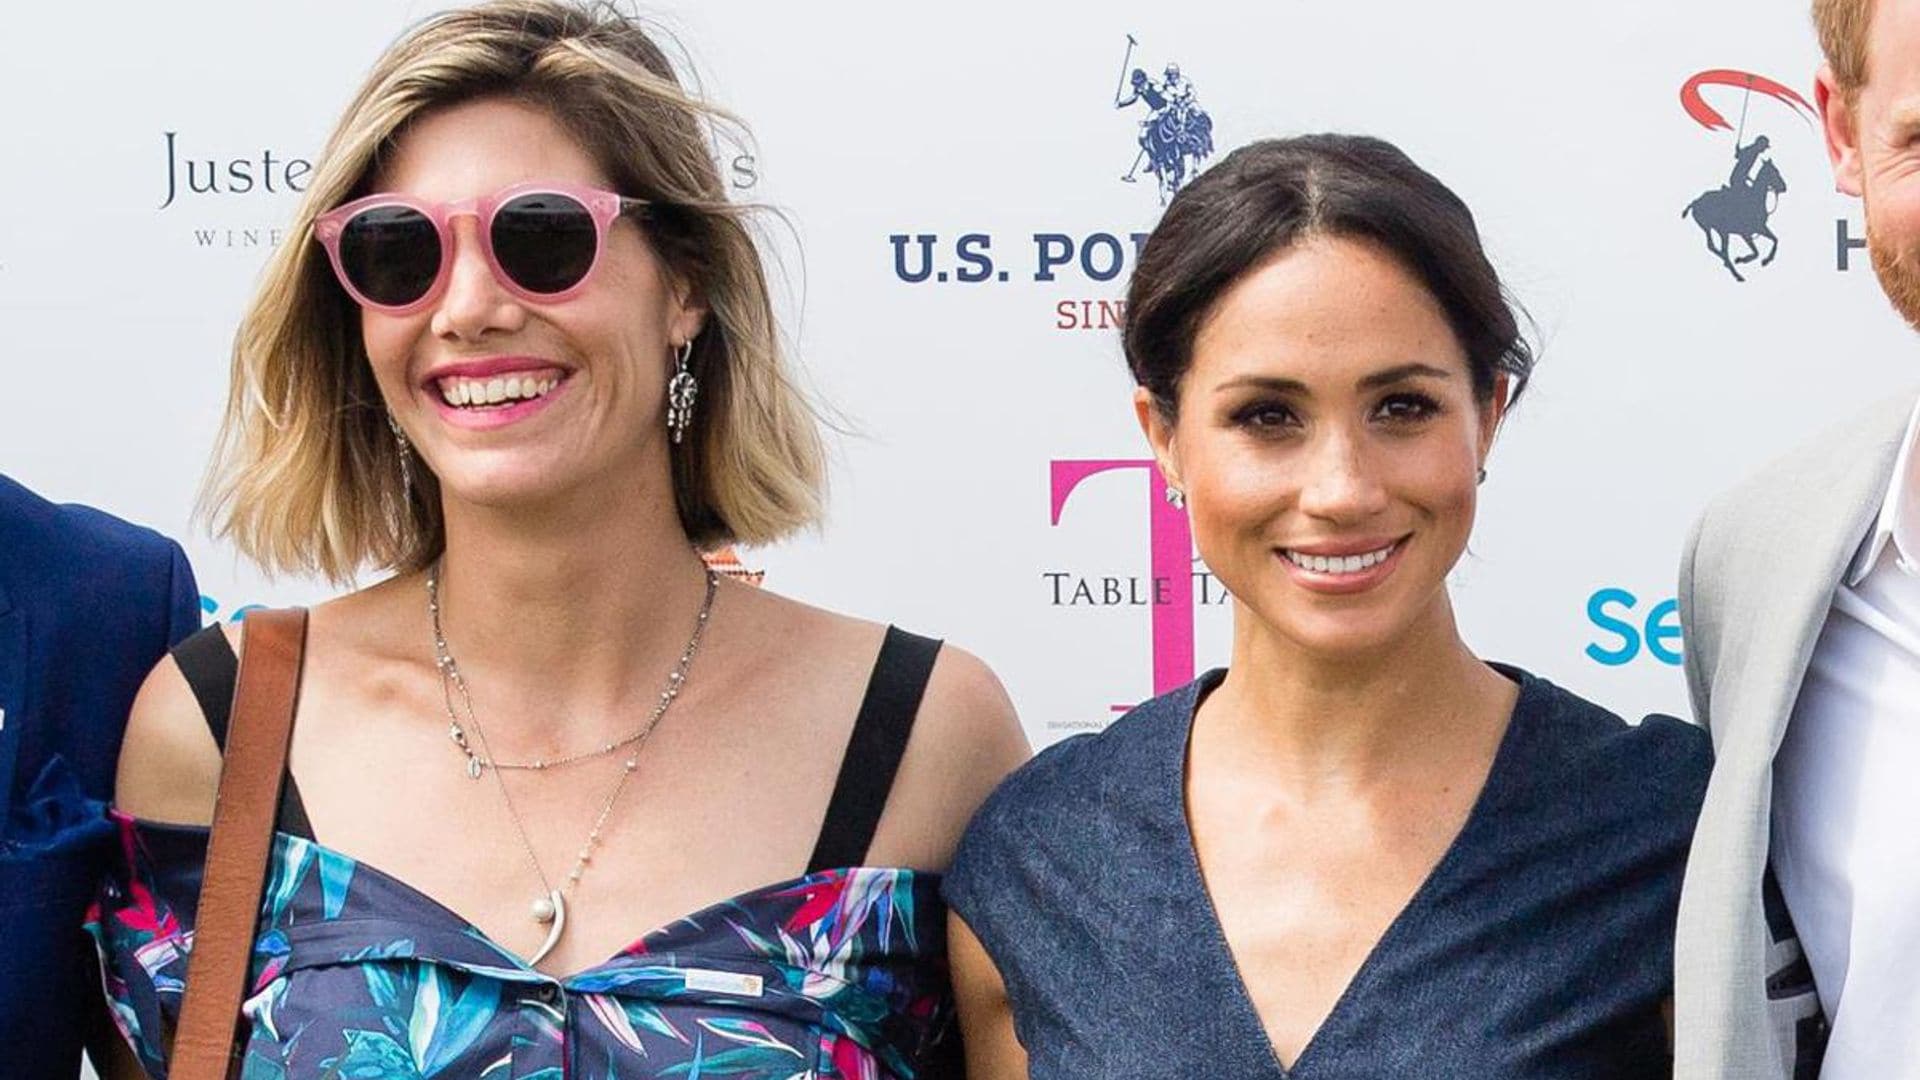 Nacho Figueras' wife pens message to her 'sister' Meghan Markle